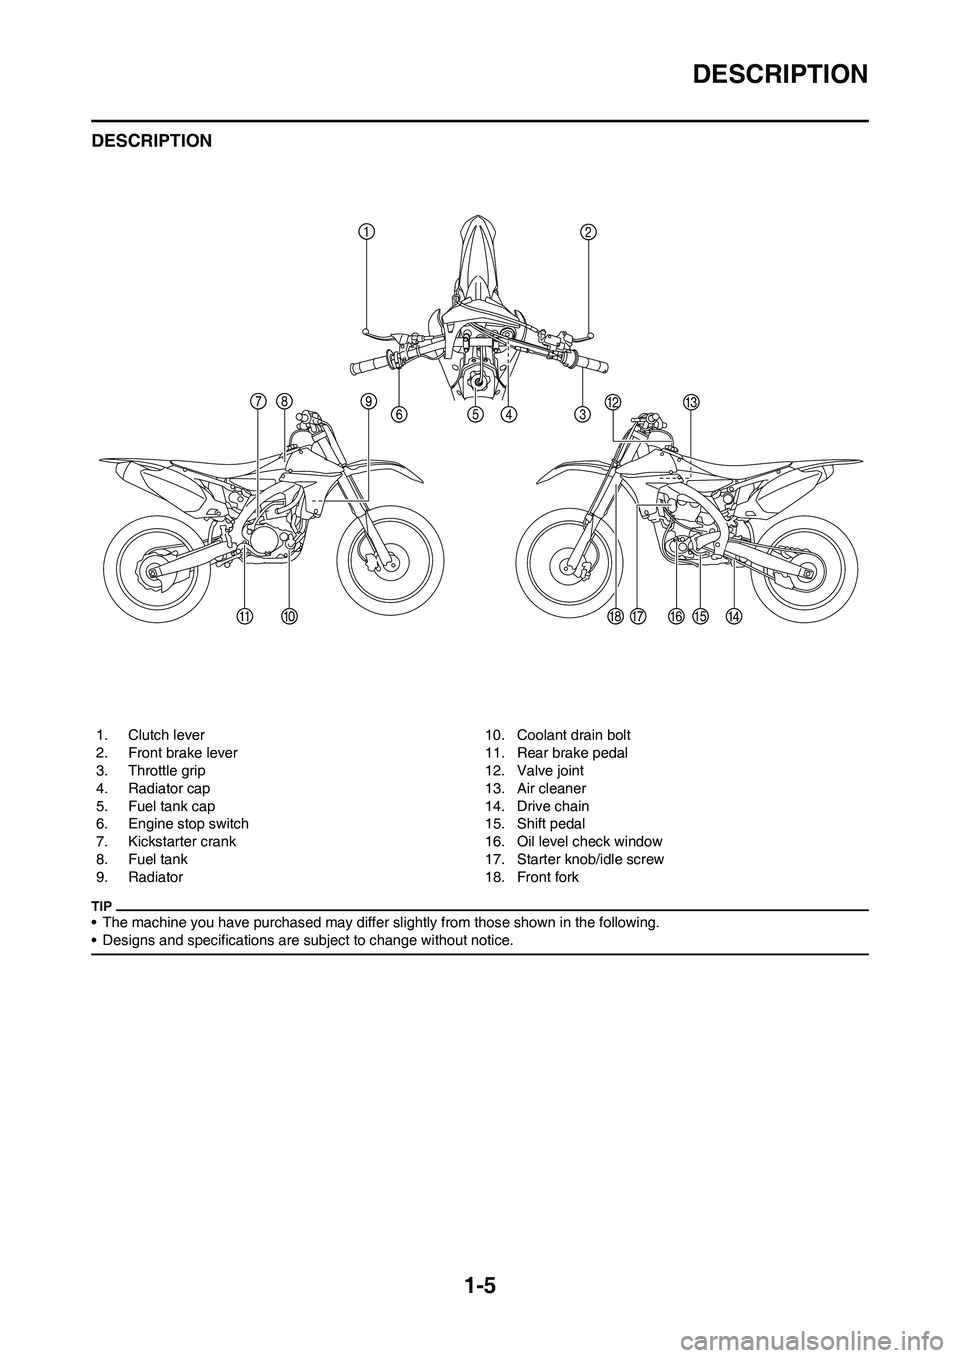 YAMAHA YZ450F 2010  Owners Manual 1-5
DESCRIPTION
DESCRIPTION
• The machine you have purchased may differ slightly from those shown in the following.
• Designs and specifications are subject to change without notice.
1. Clutch lev